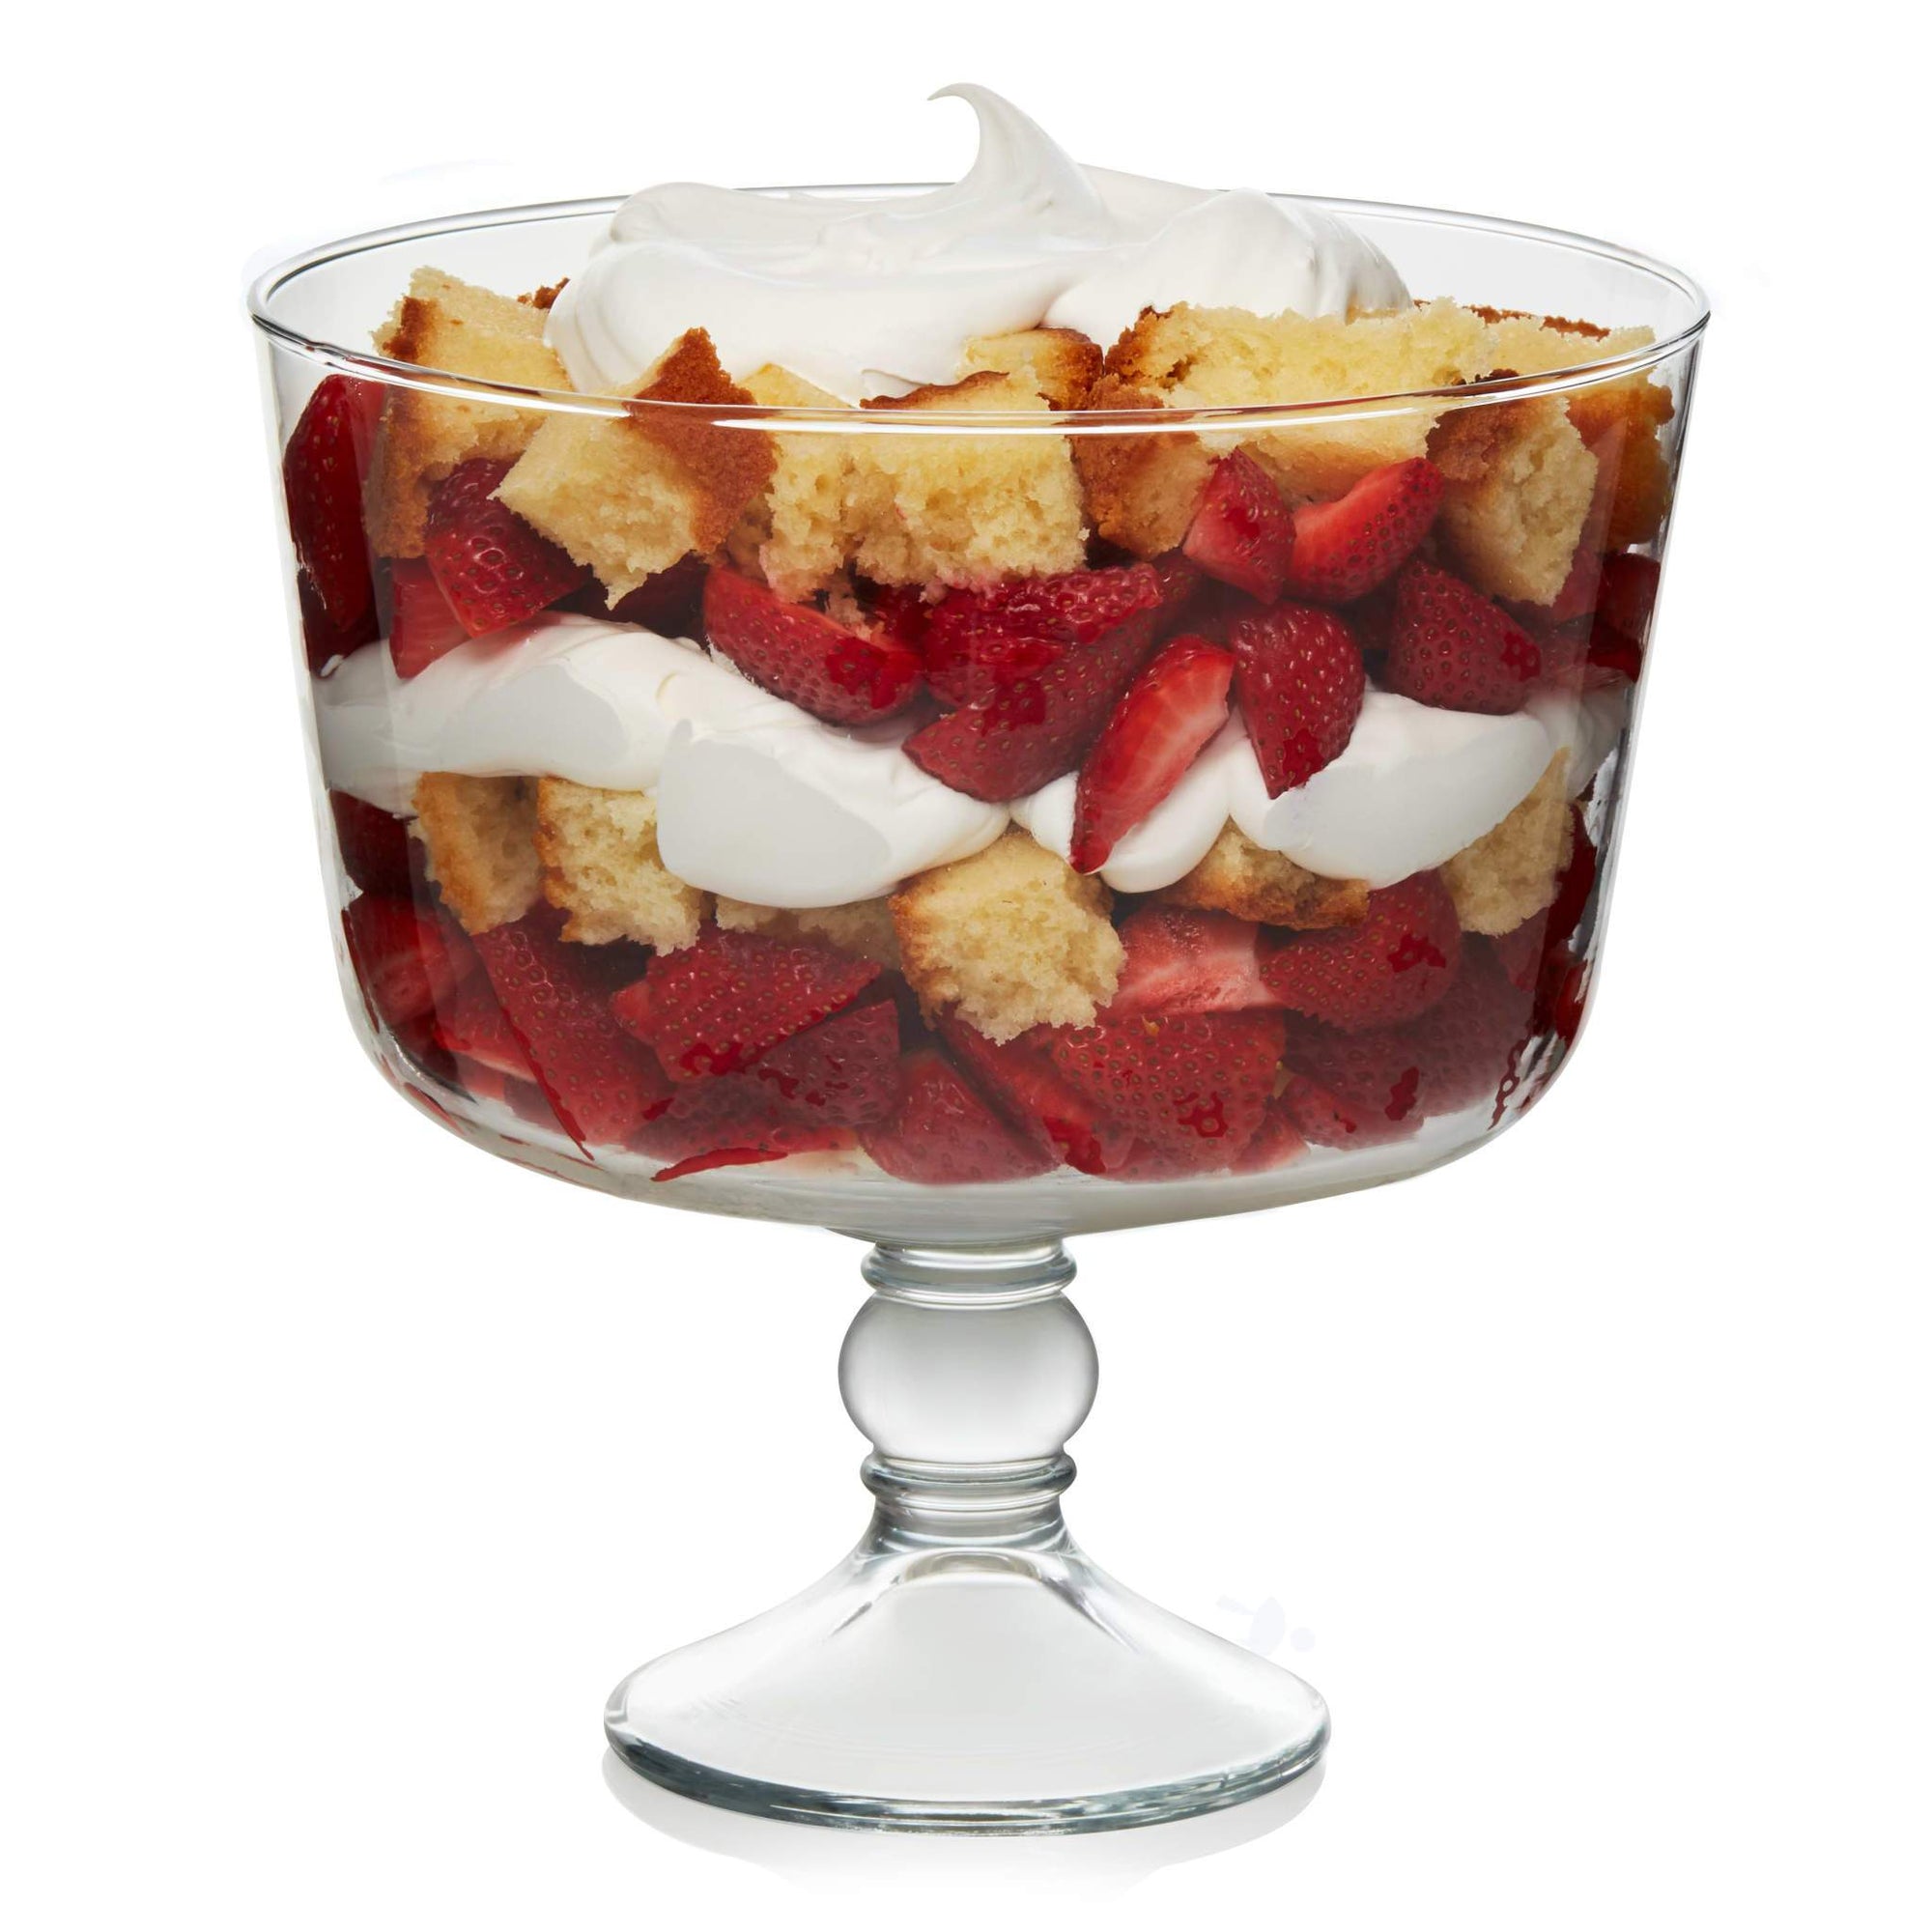 Libbey Selene Footed Glass Trifle Bowl, 9-inch